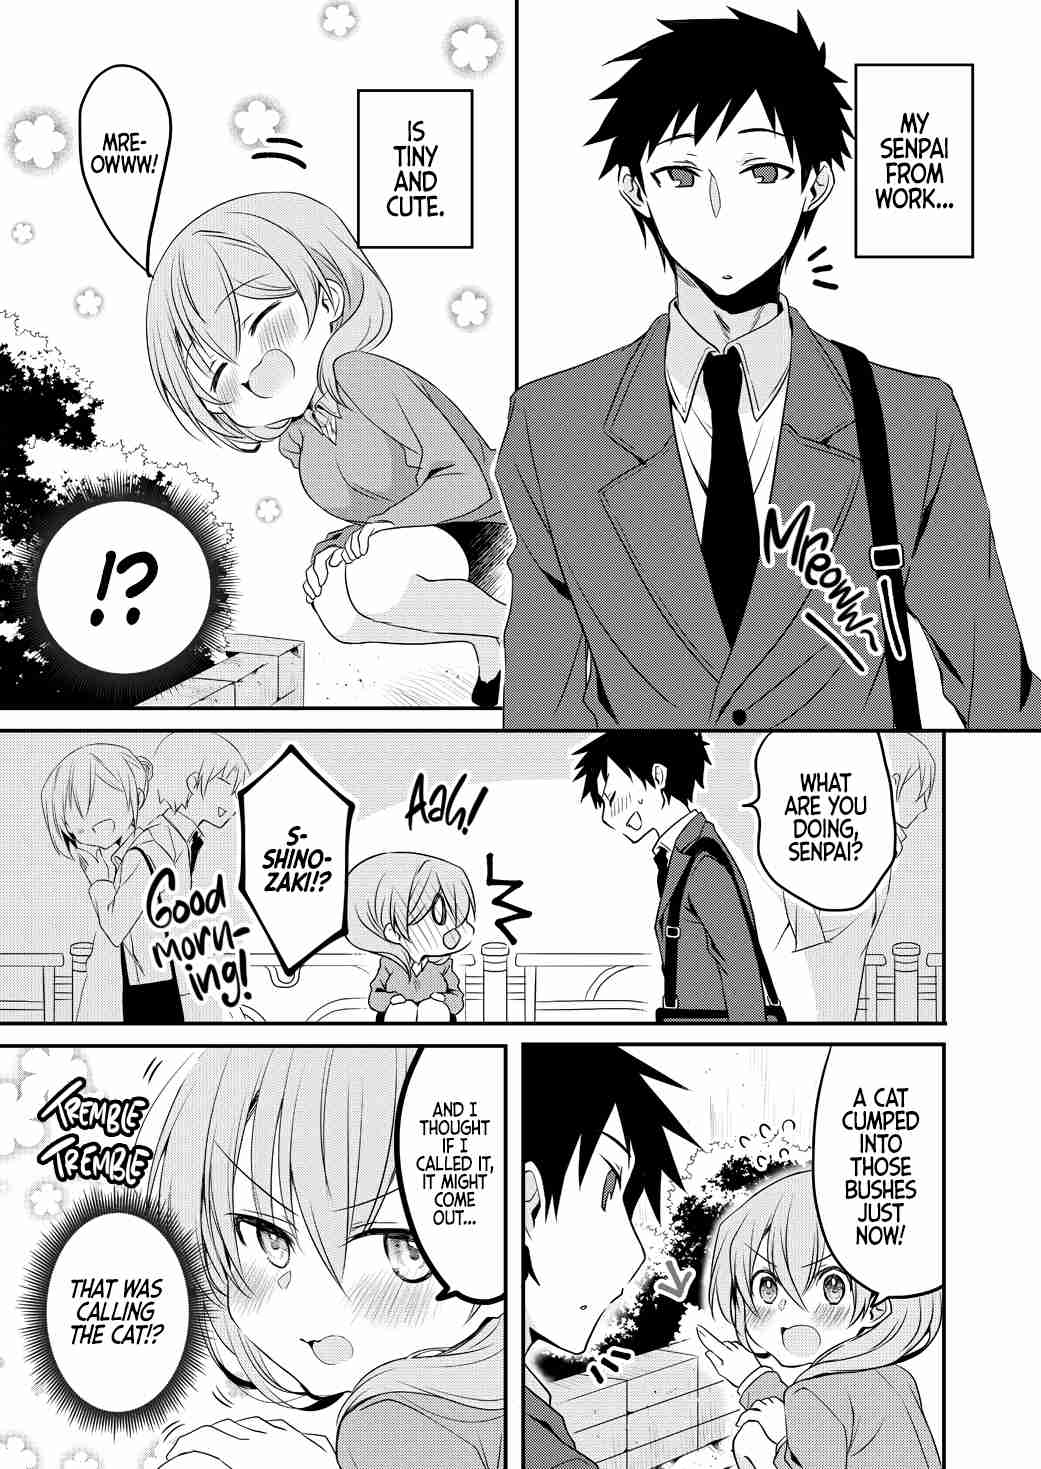 My Tiny Senpai From Work Vol. 1 Ch. 47